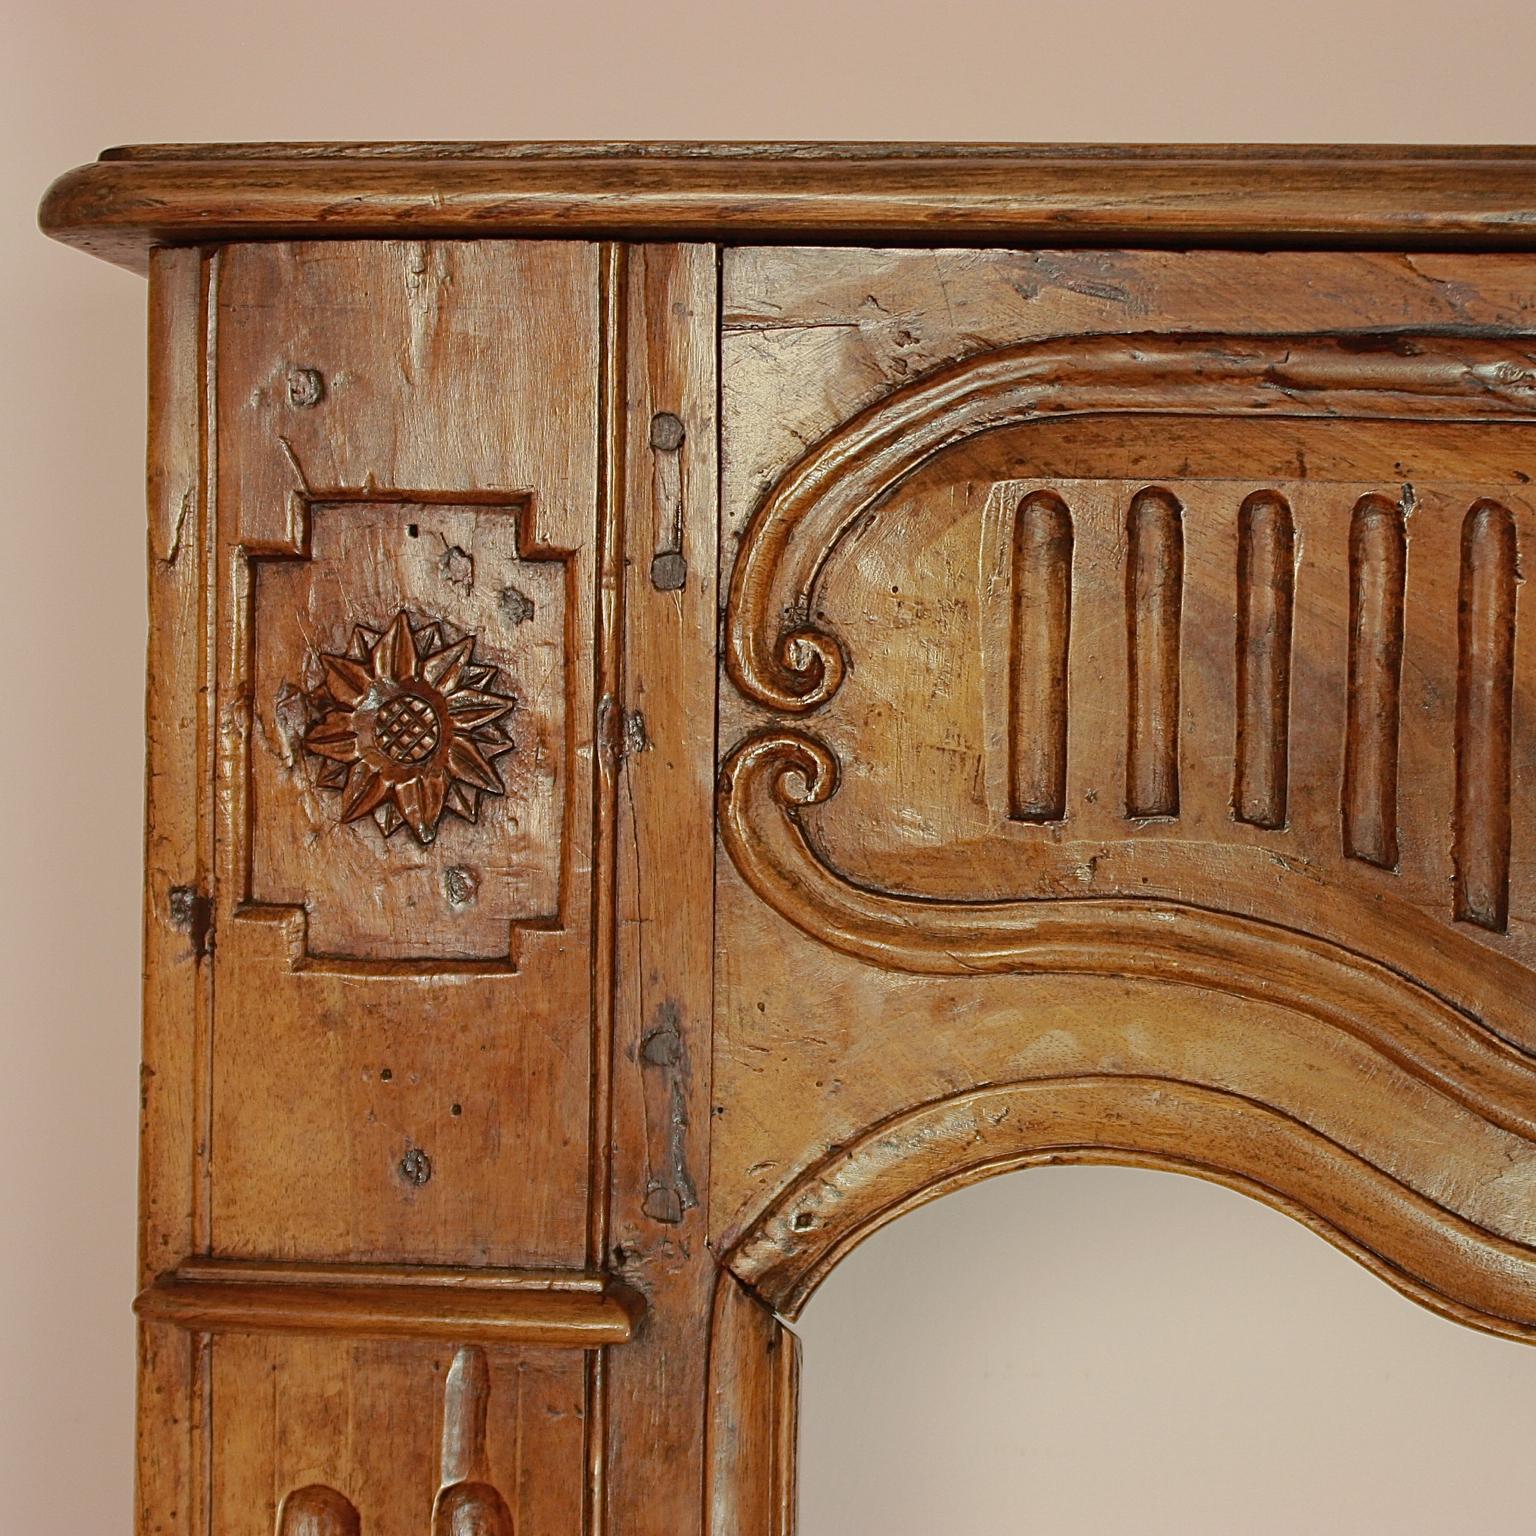 An exceptional large walnut fireplace surround measuring 7 feet and 8.1 inches (2.34 m) in width, carved in walnut with a beautiful patina. Originating from the Louis XIV period and crafted in a plain Provincial design. The surface accumulated a